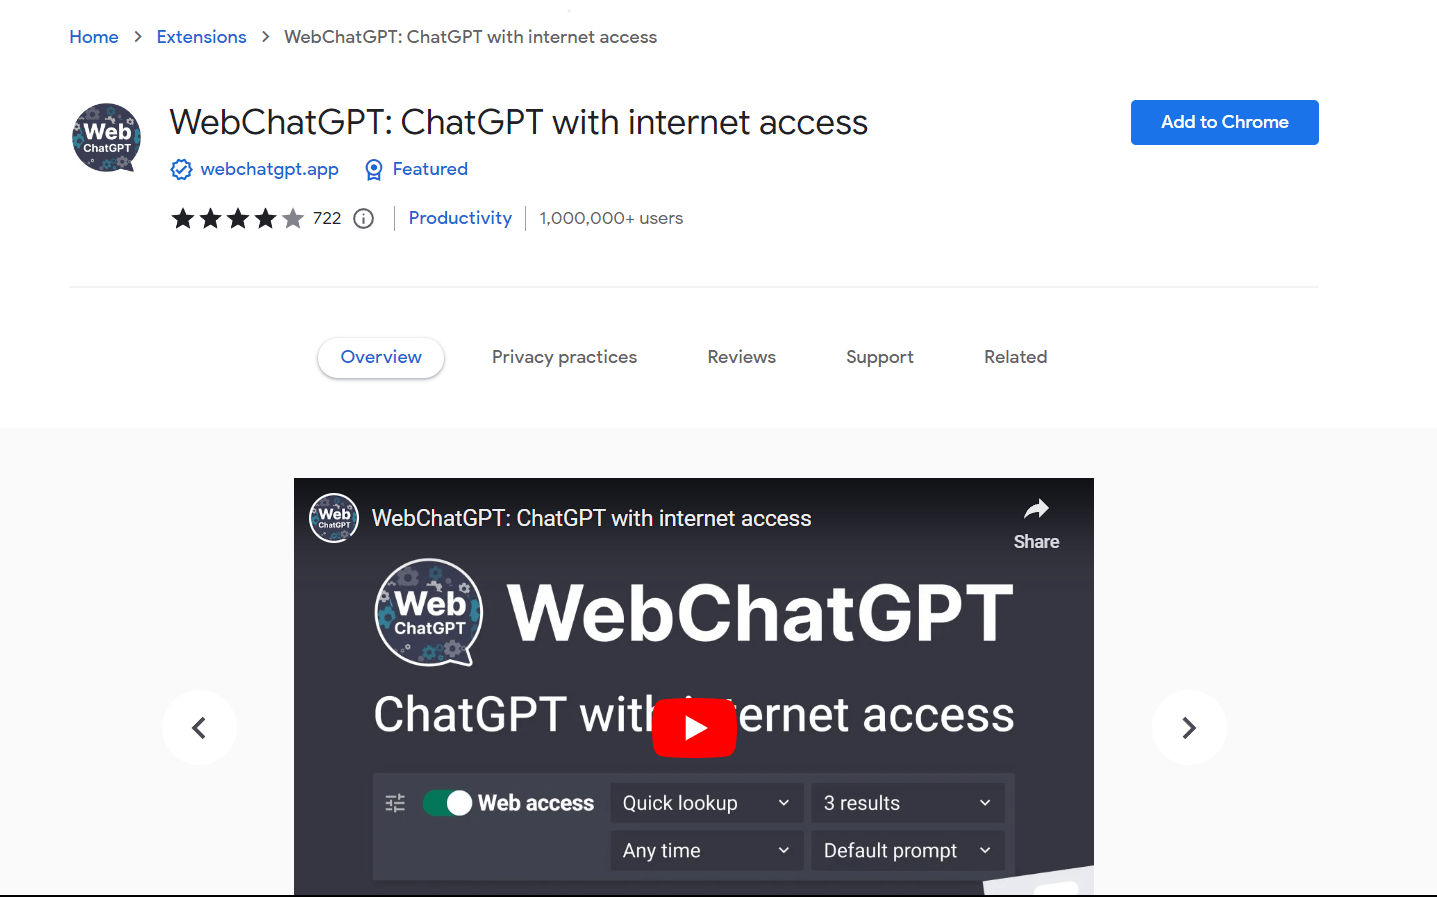 open Google Chrome and search for "WebchatGPT extension